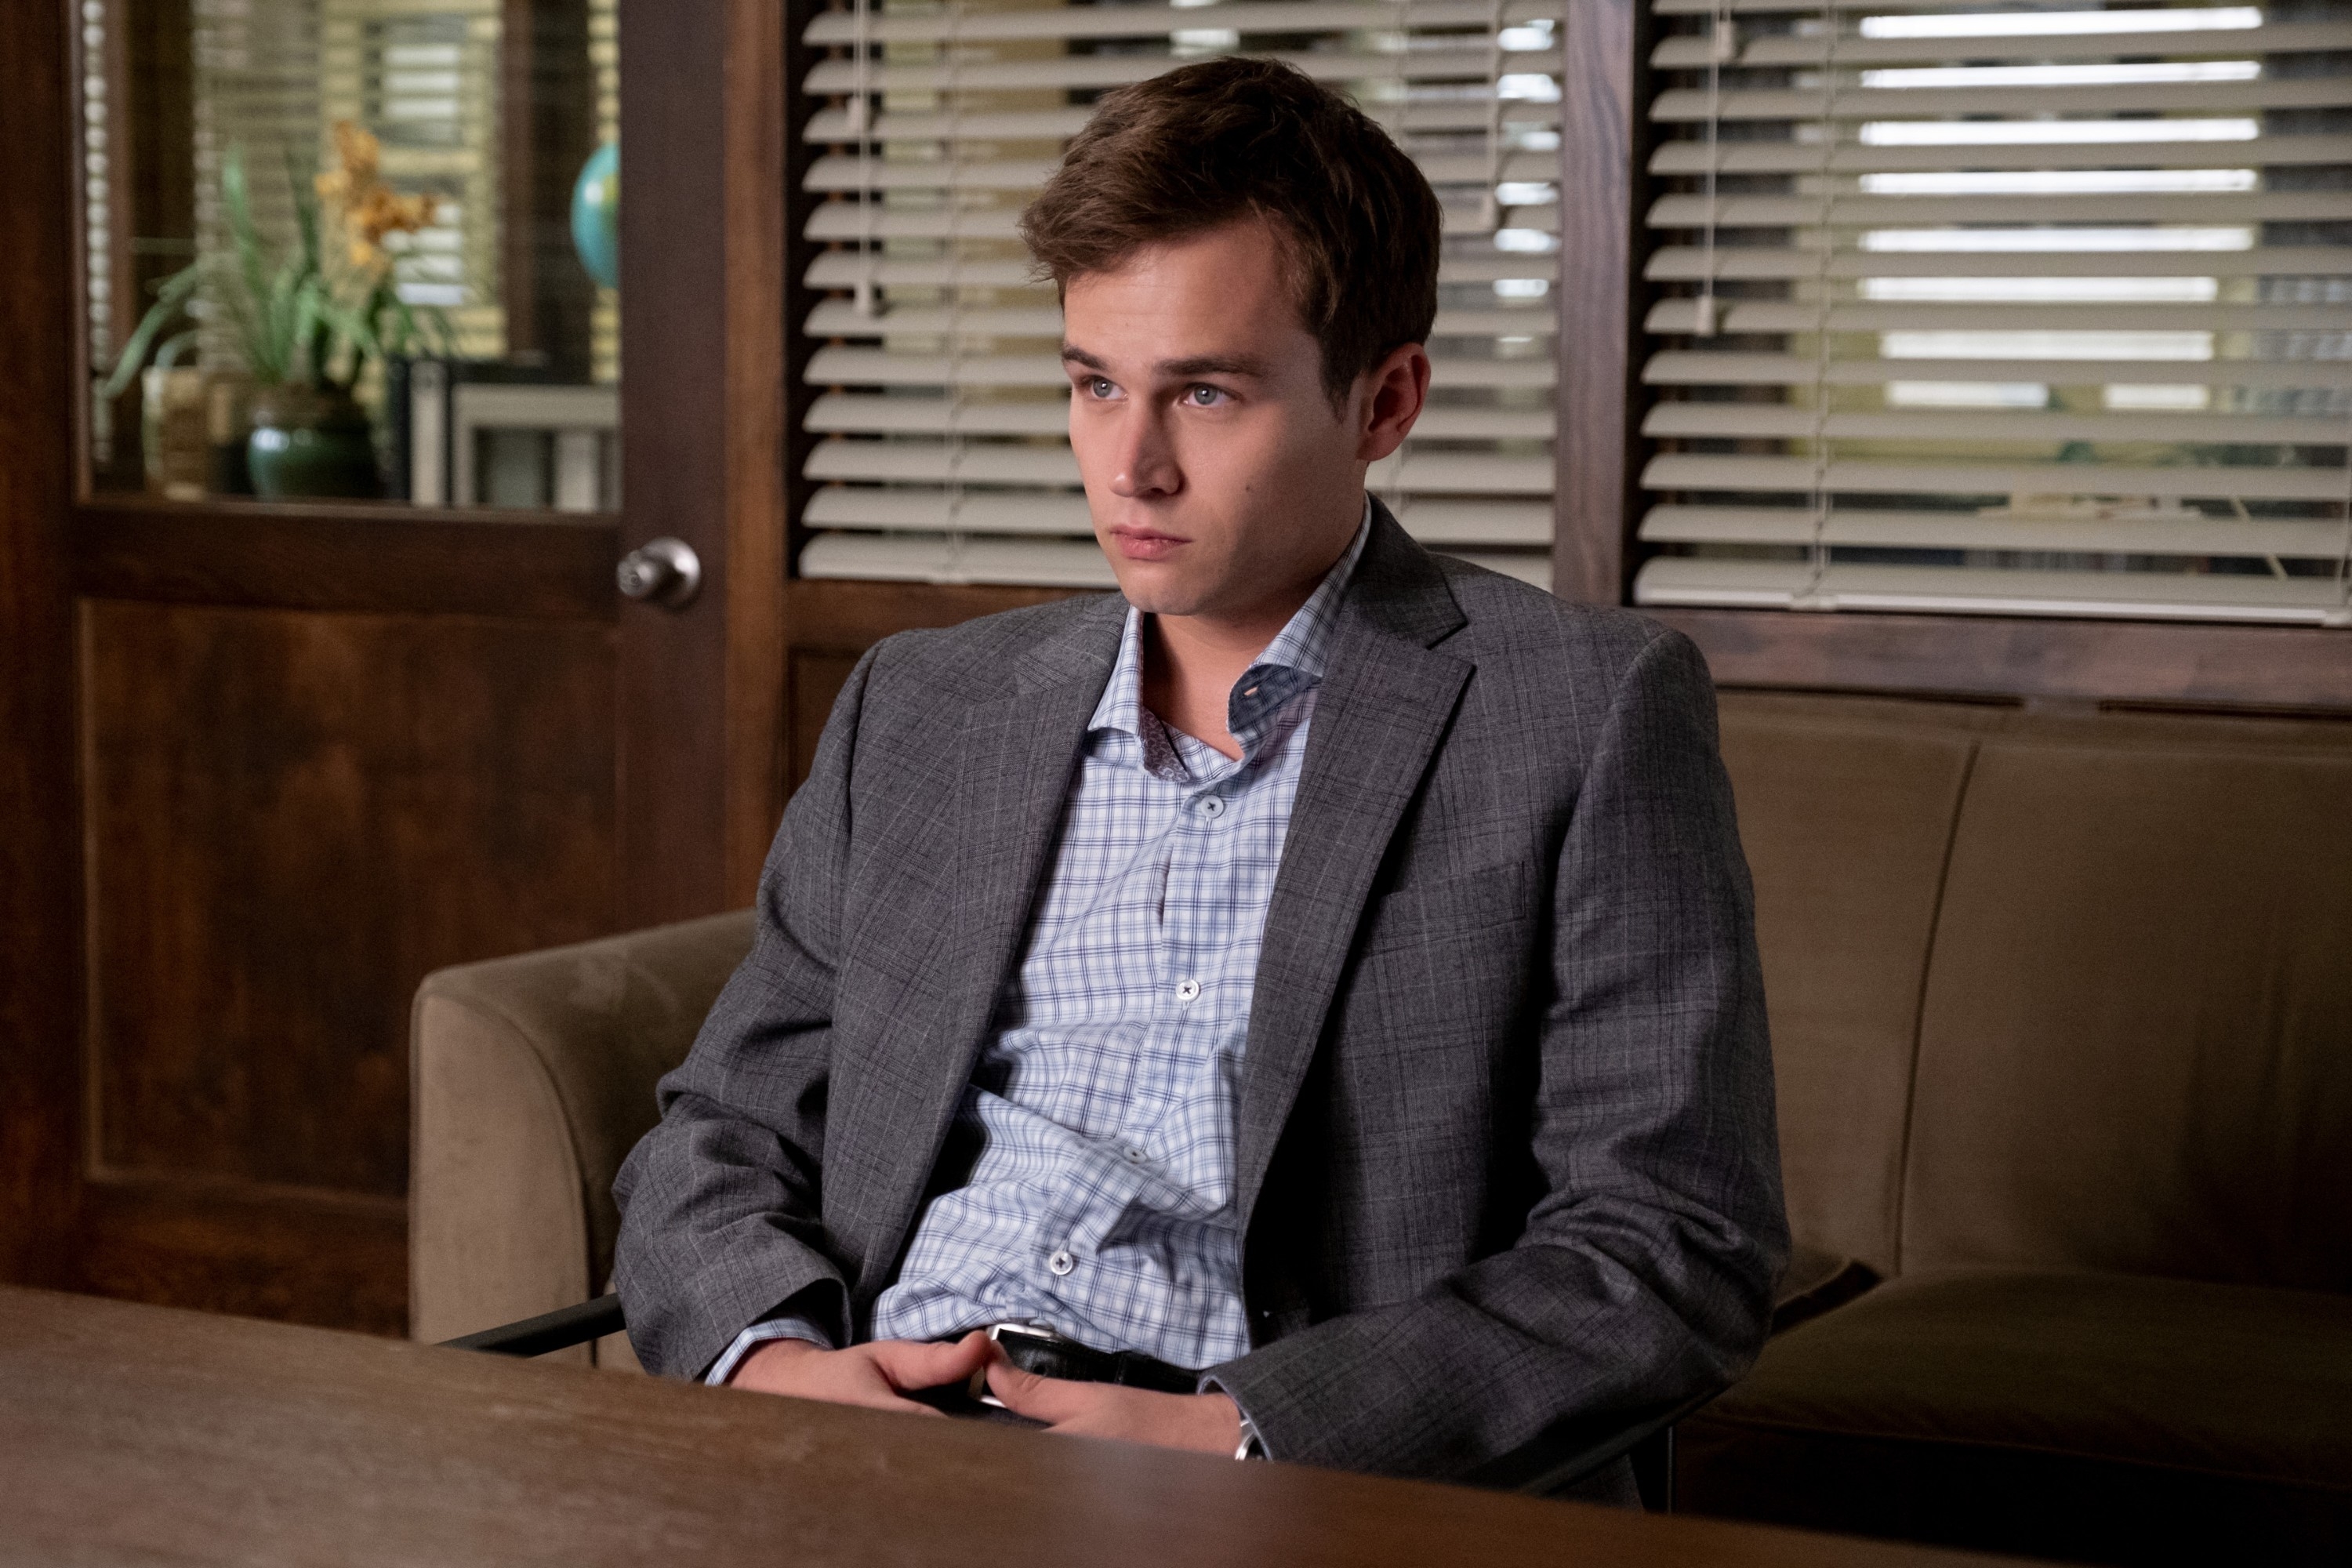 Character from a TV show sitting in an office wearing a suit and checkered shirt